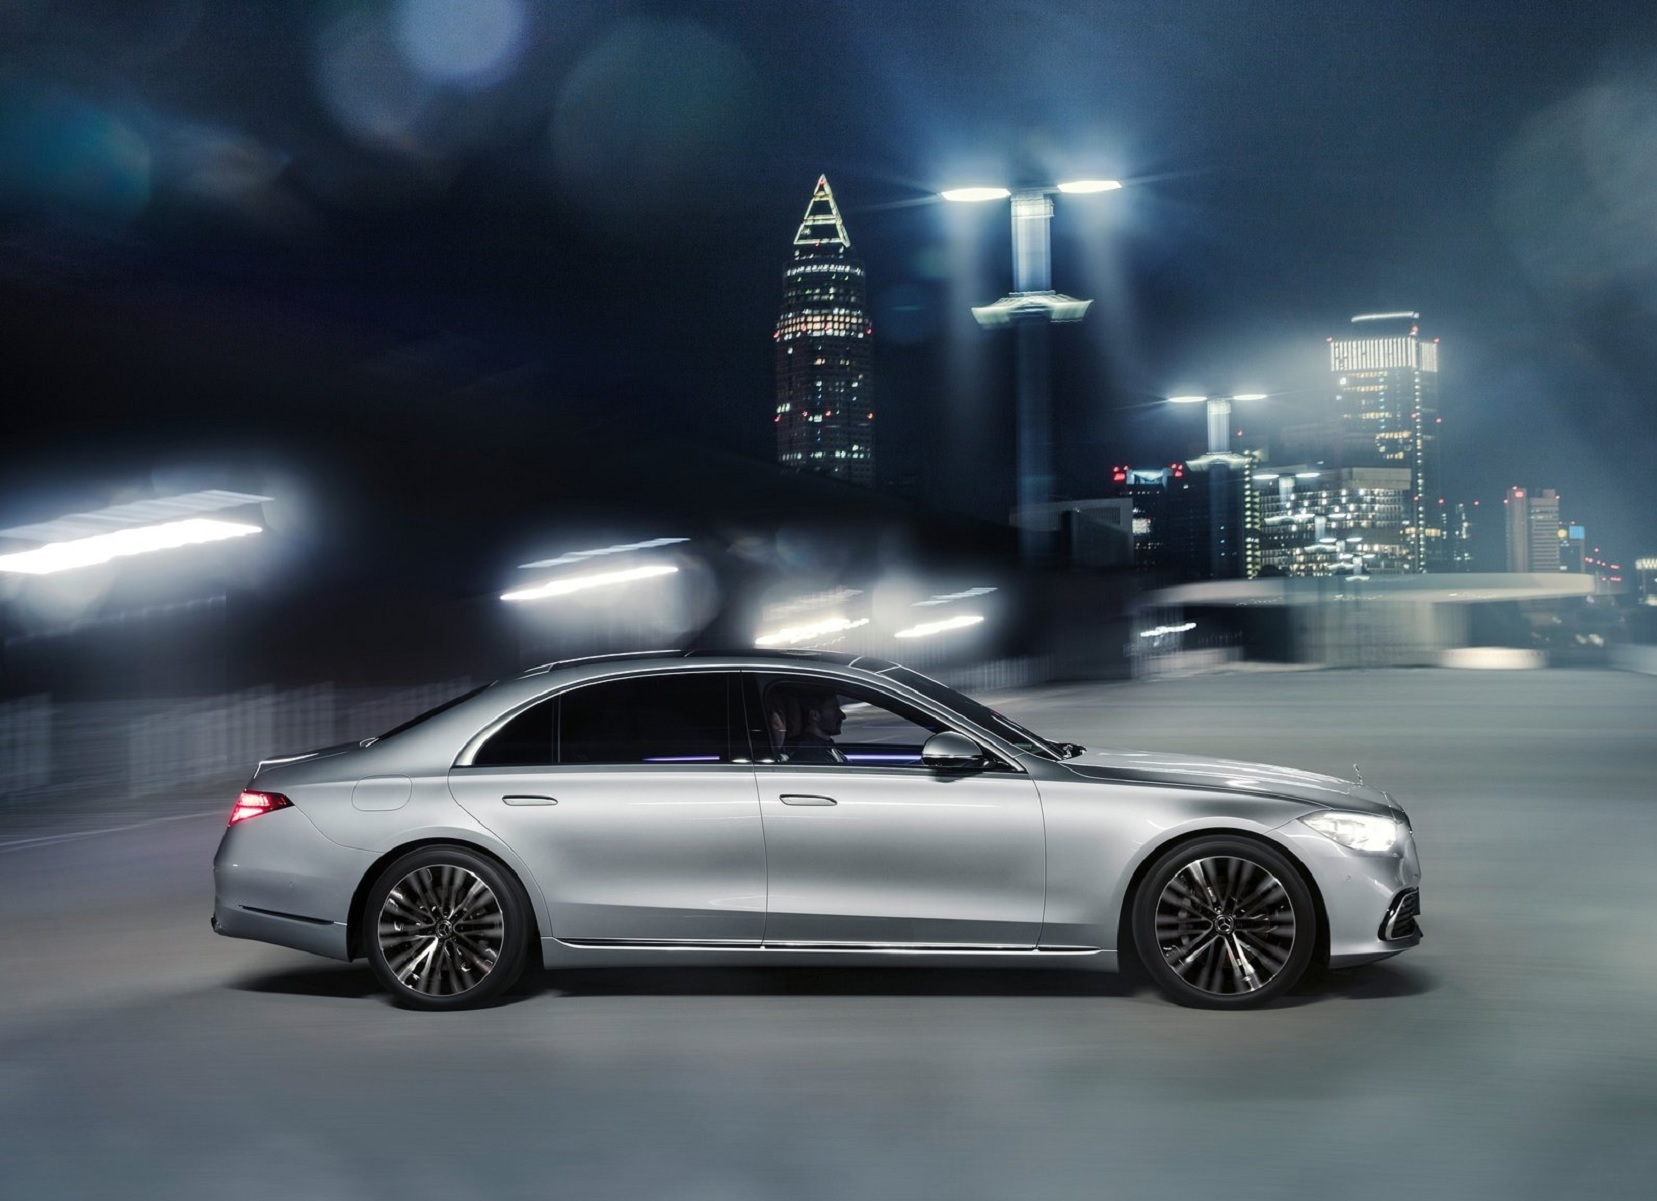 How The Mercedes S Class Shows The Future Of Car Safety